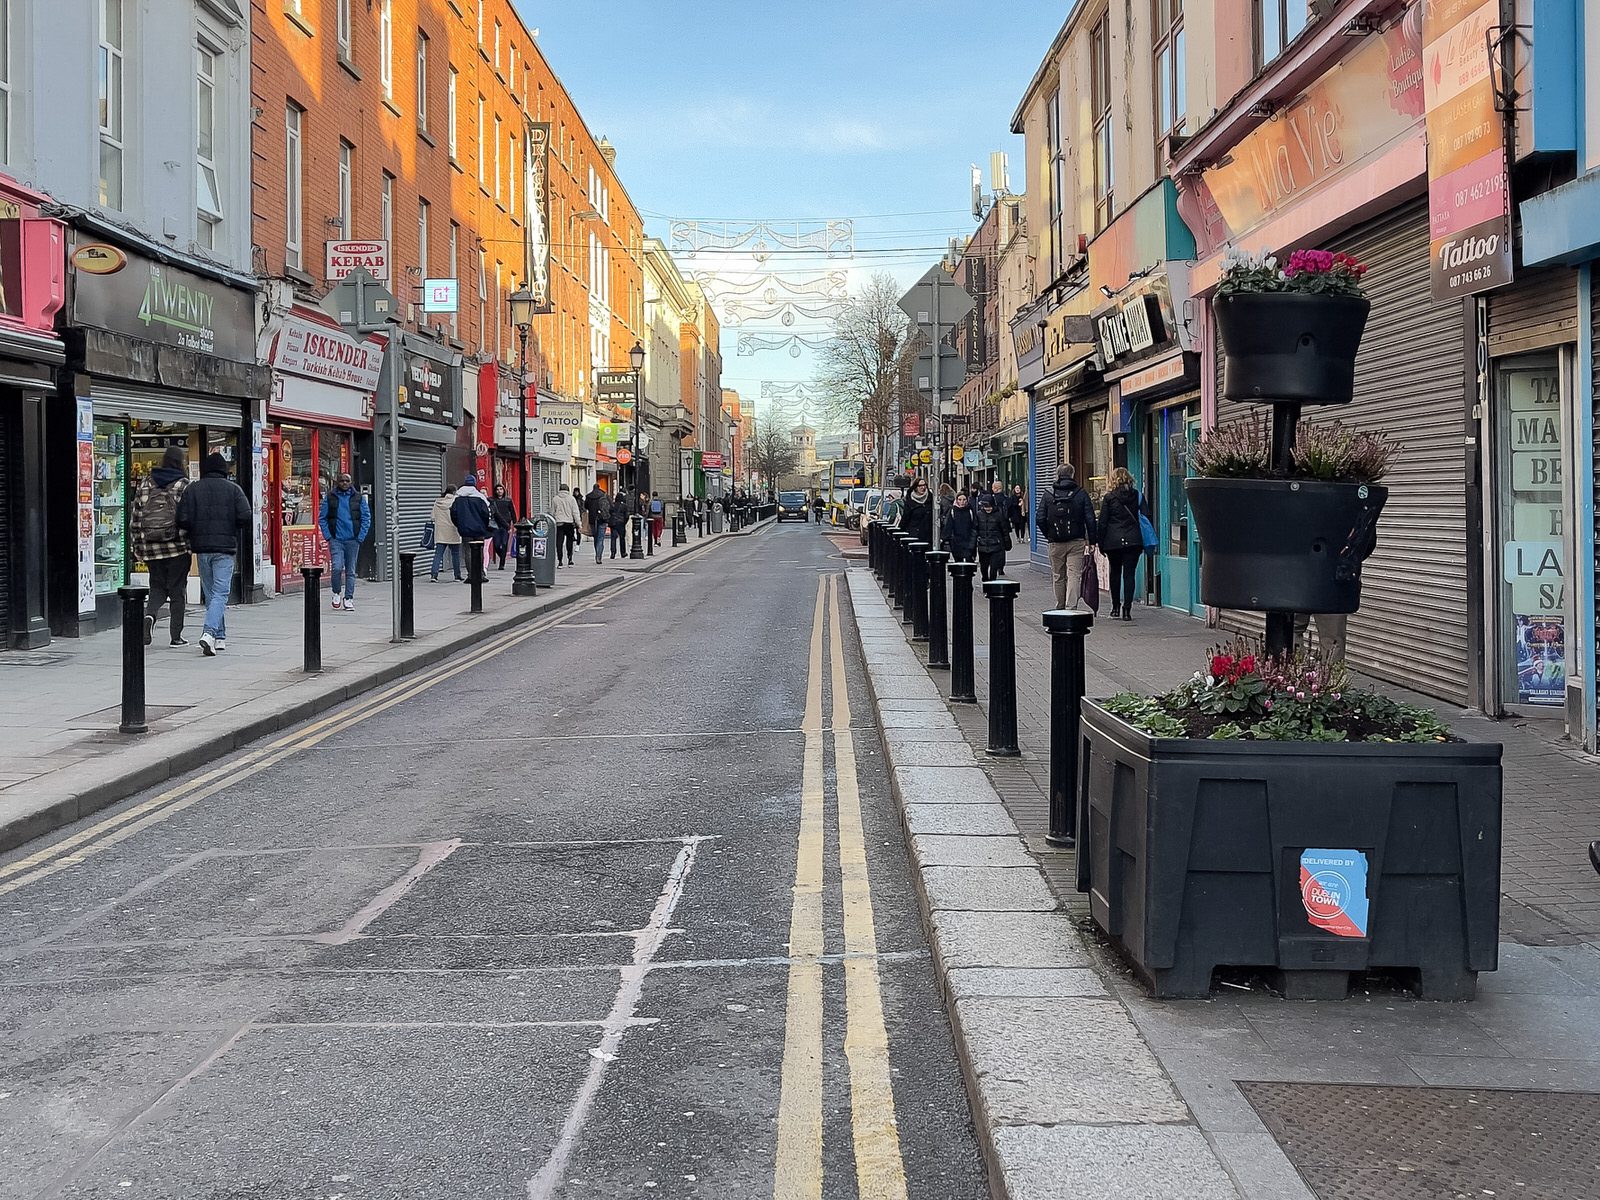 TALBOT STREET [FAILS TO MEET ITS POTENTIAL AS A MAJOR SHOPPING STREET]-225716-1